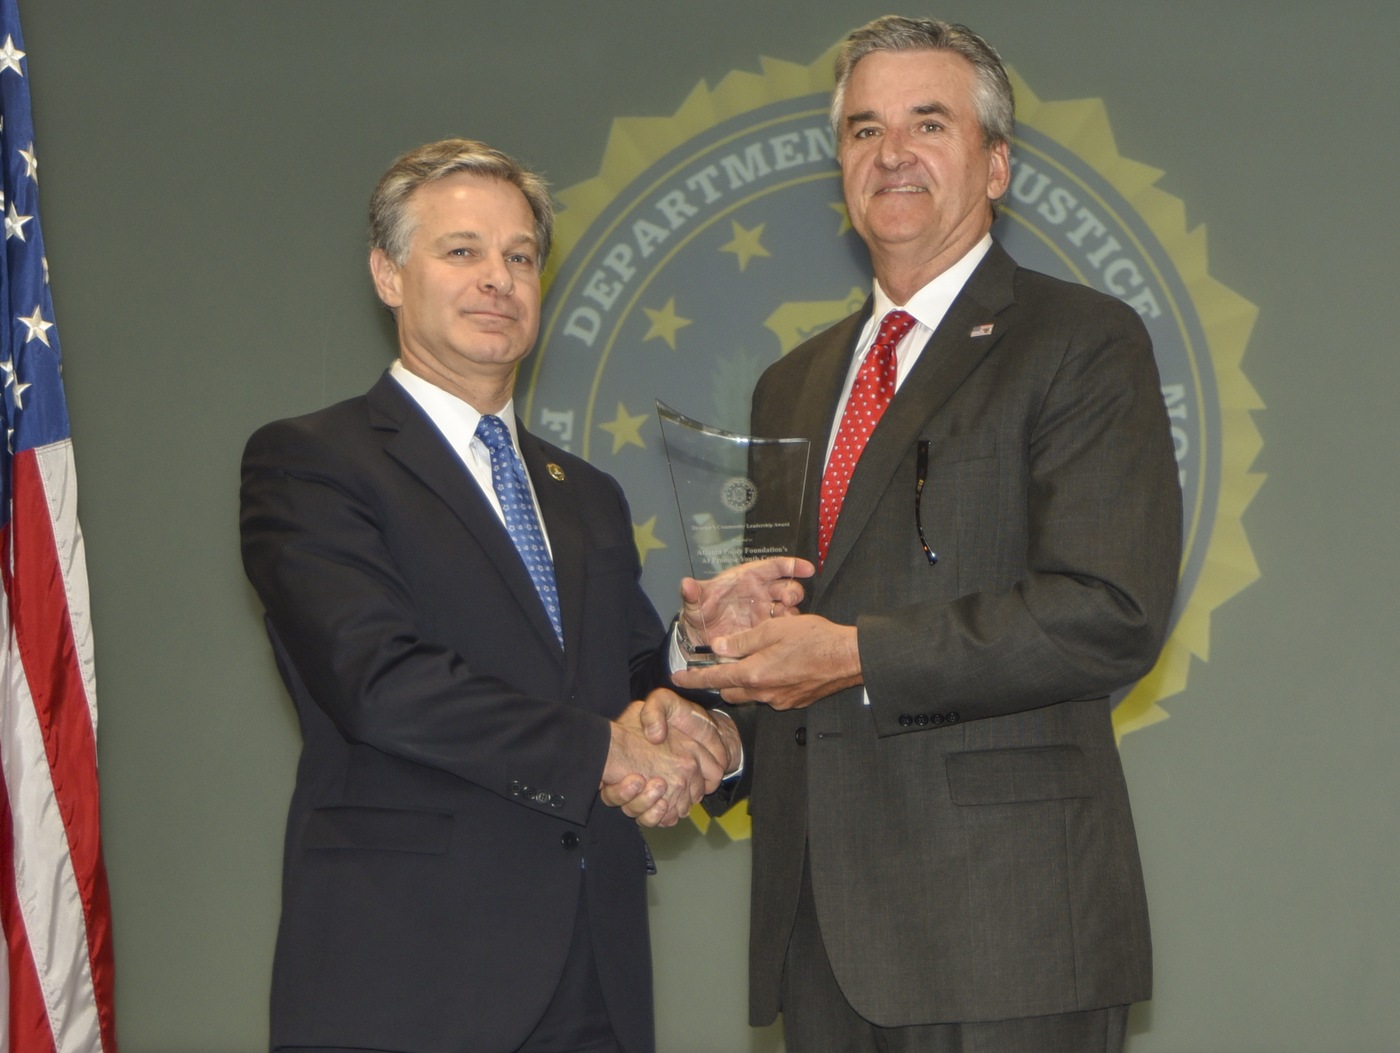 FBI Director Christopher Wray presents Atlanta Division recipient the Atlanta Police Foundation’s At Promise Youth Center with the Director’s Community Leadership Award (DCLA) at a ceremony at FBI Headquarters on May 3, 2019.